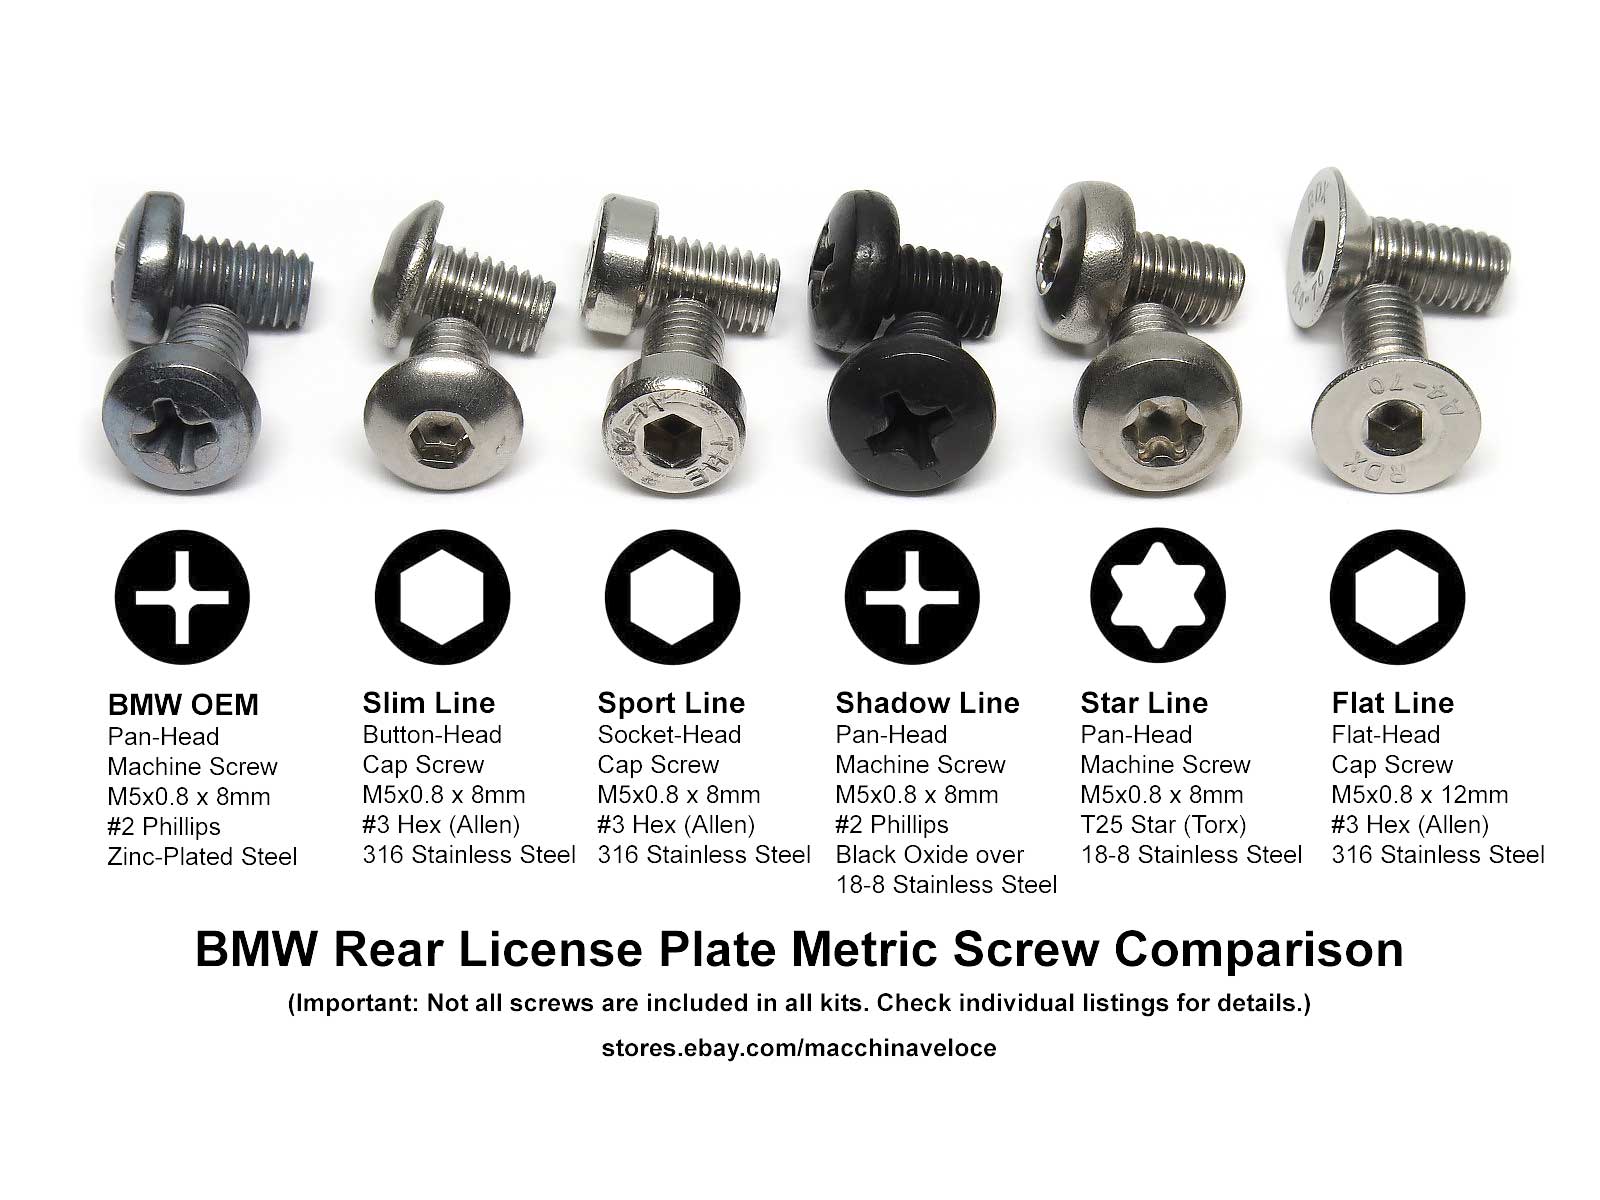 How to buy BMW license plate screws | E92 N55